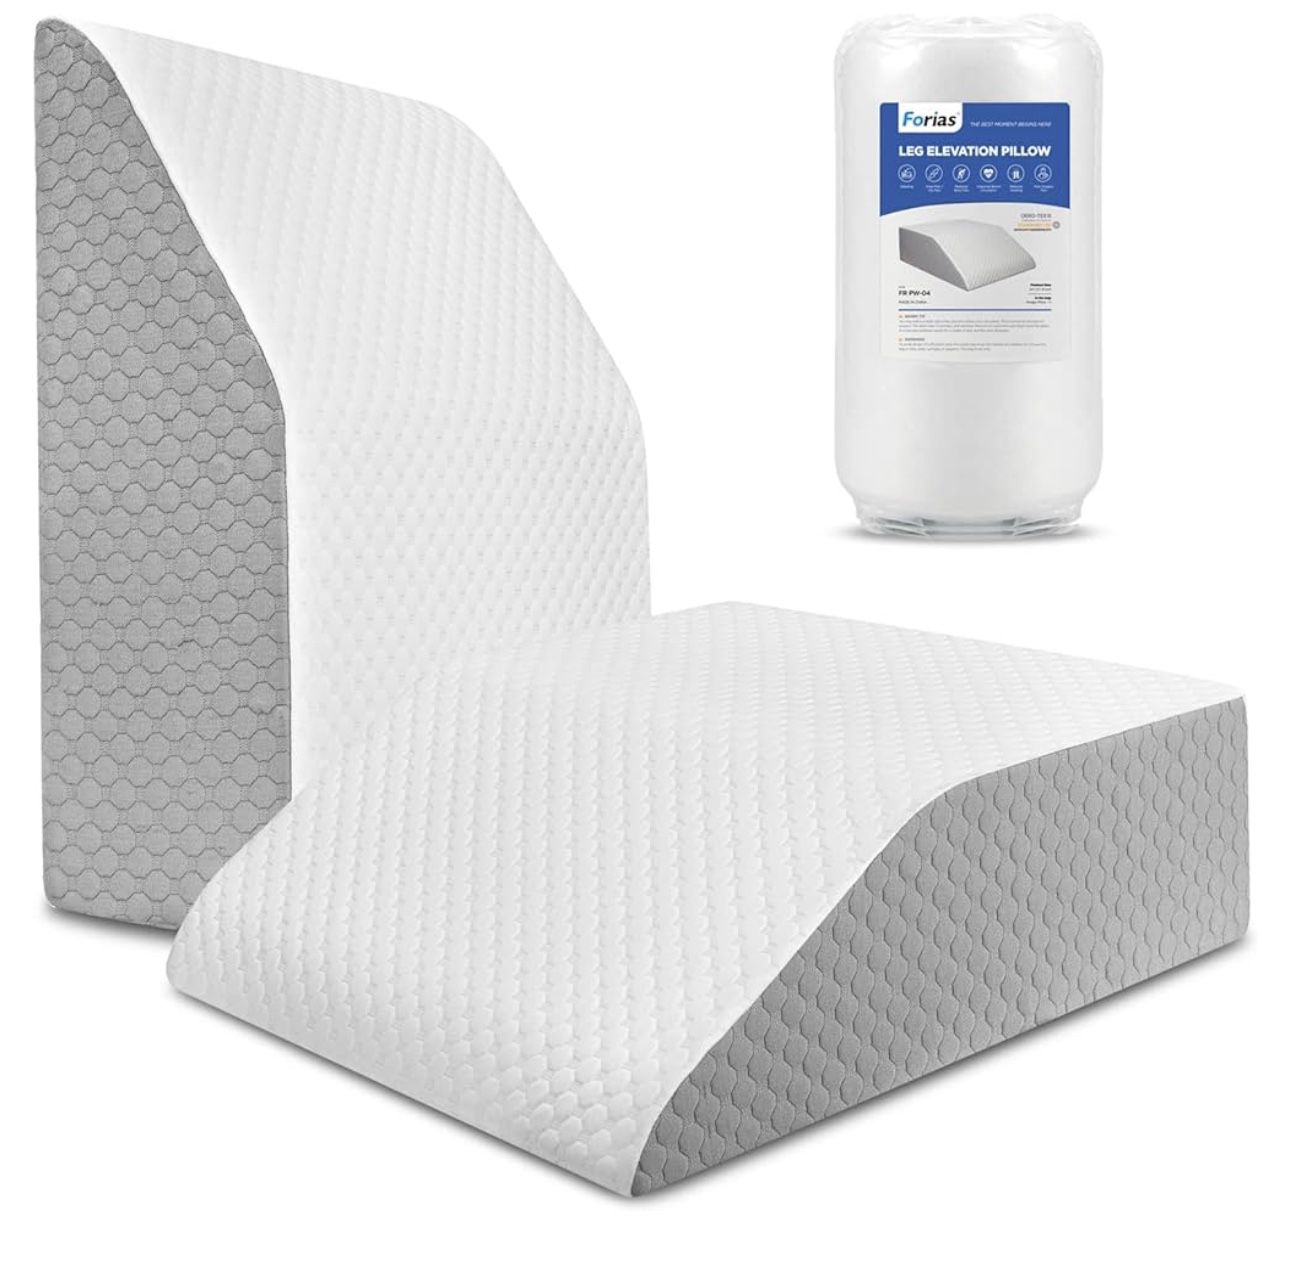 Forias 12" Wedge Pillow and 8" Leg Elevation Pillow, Bed Wedge Pillow for Sleeping Acid Reflux After Surgery Snoring Knee Legs Relax Back Pain Relief,